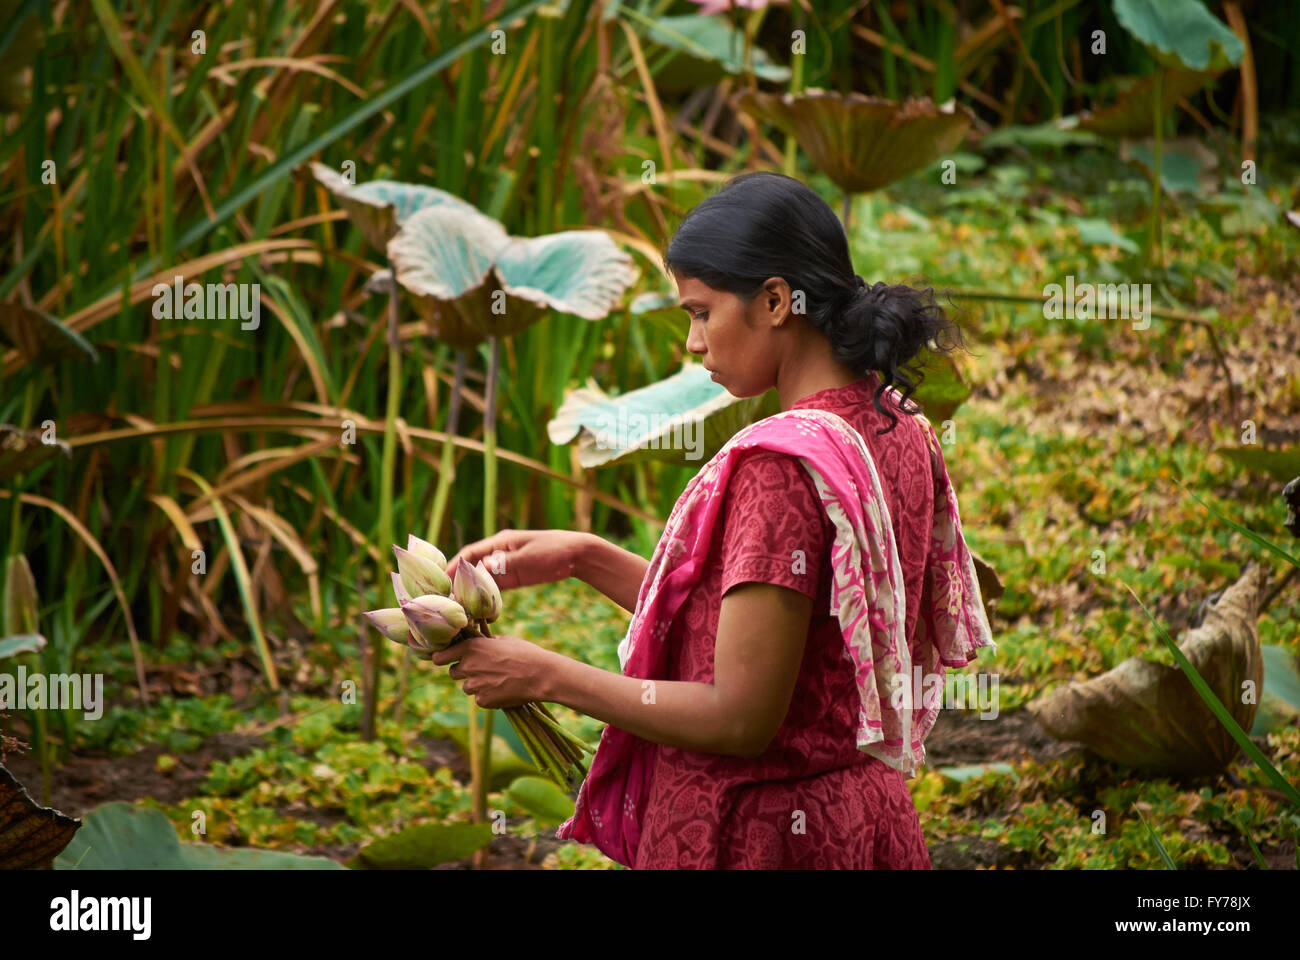 Picking Lotus flowers to sell on street markets Stock Photo